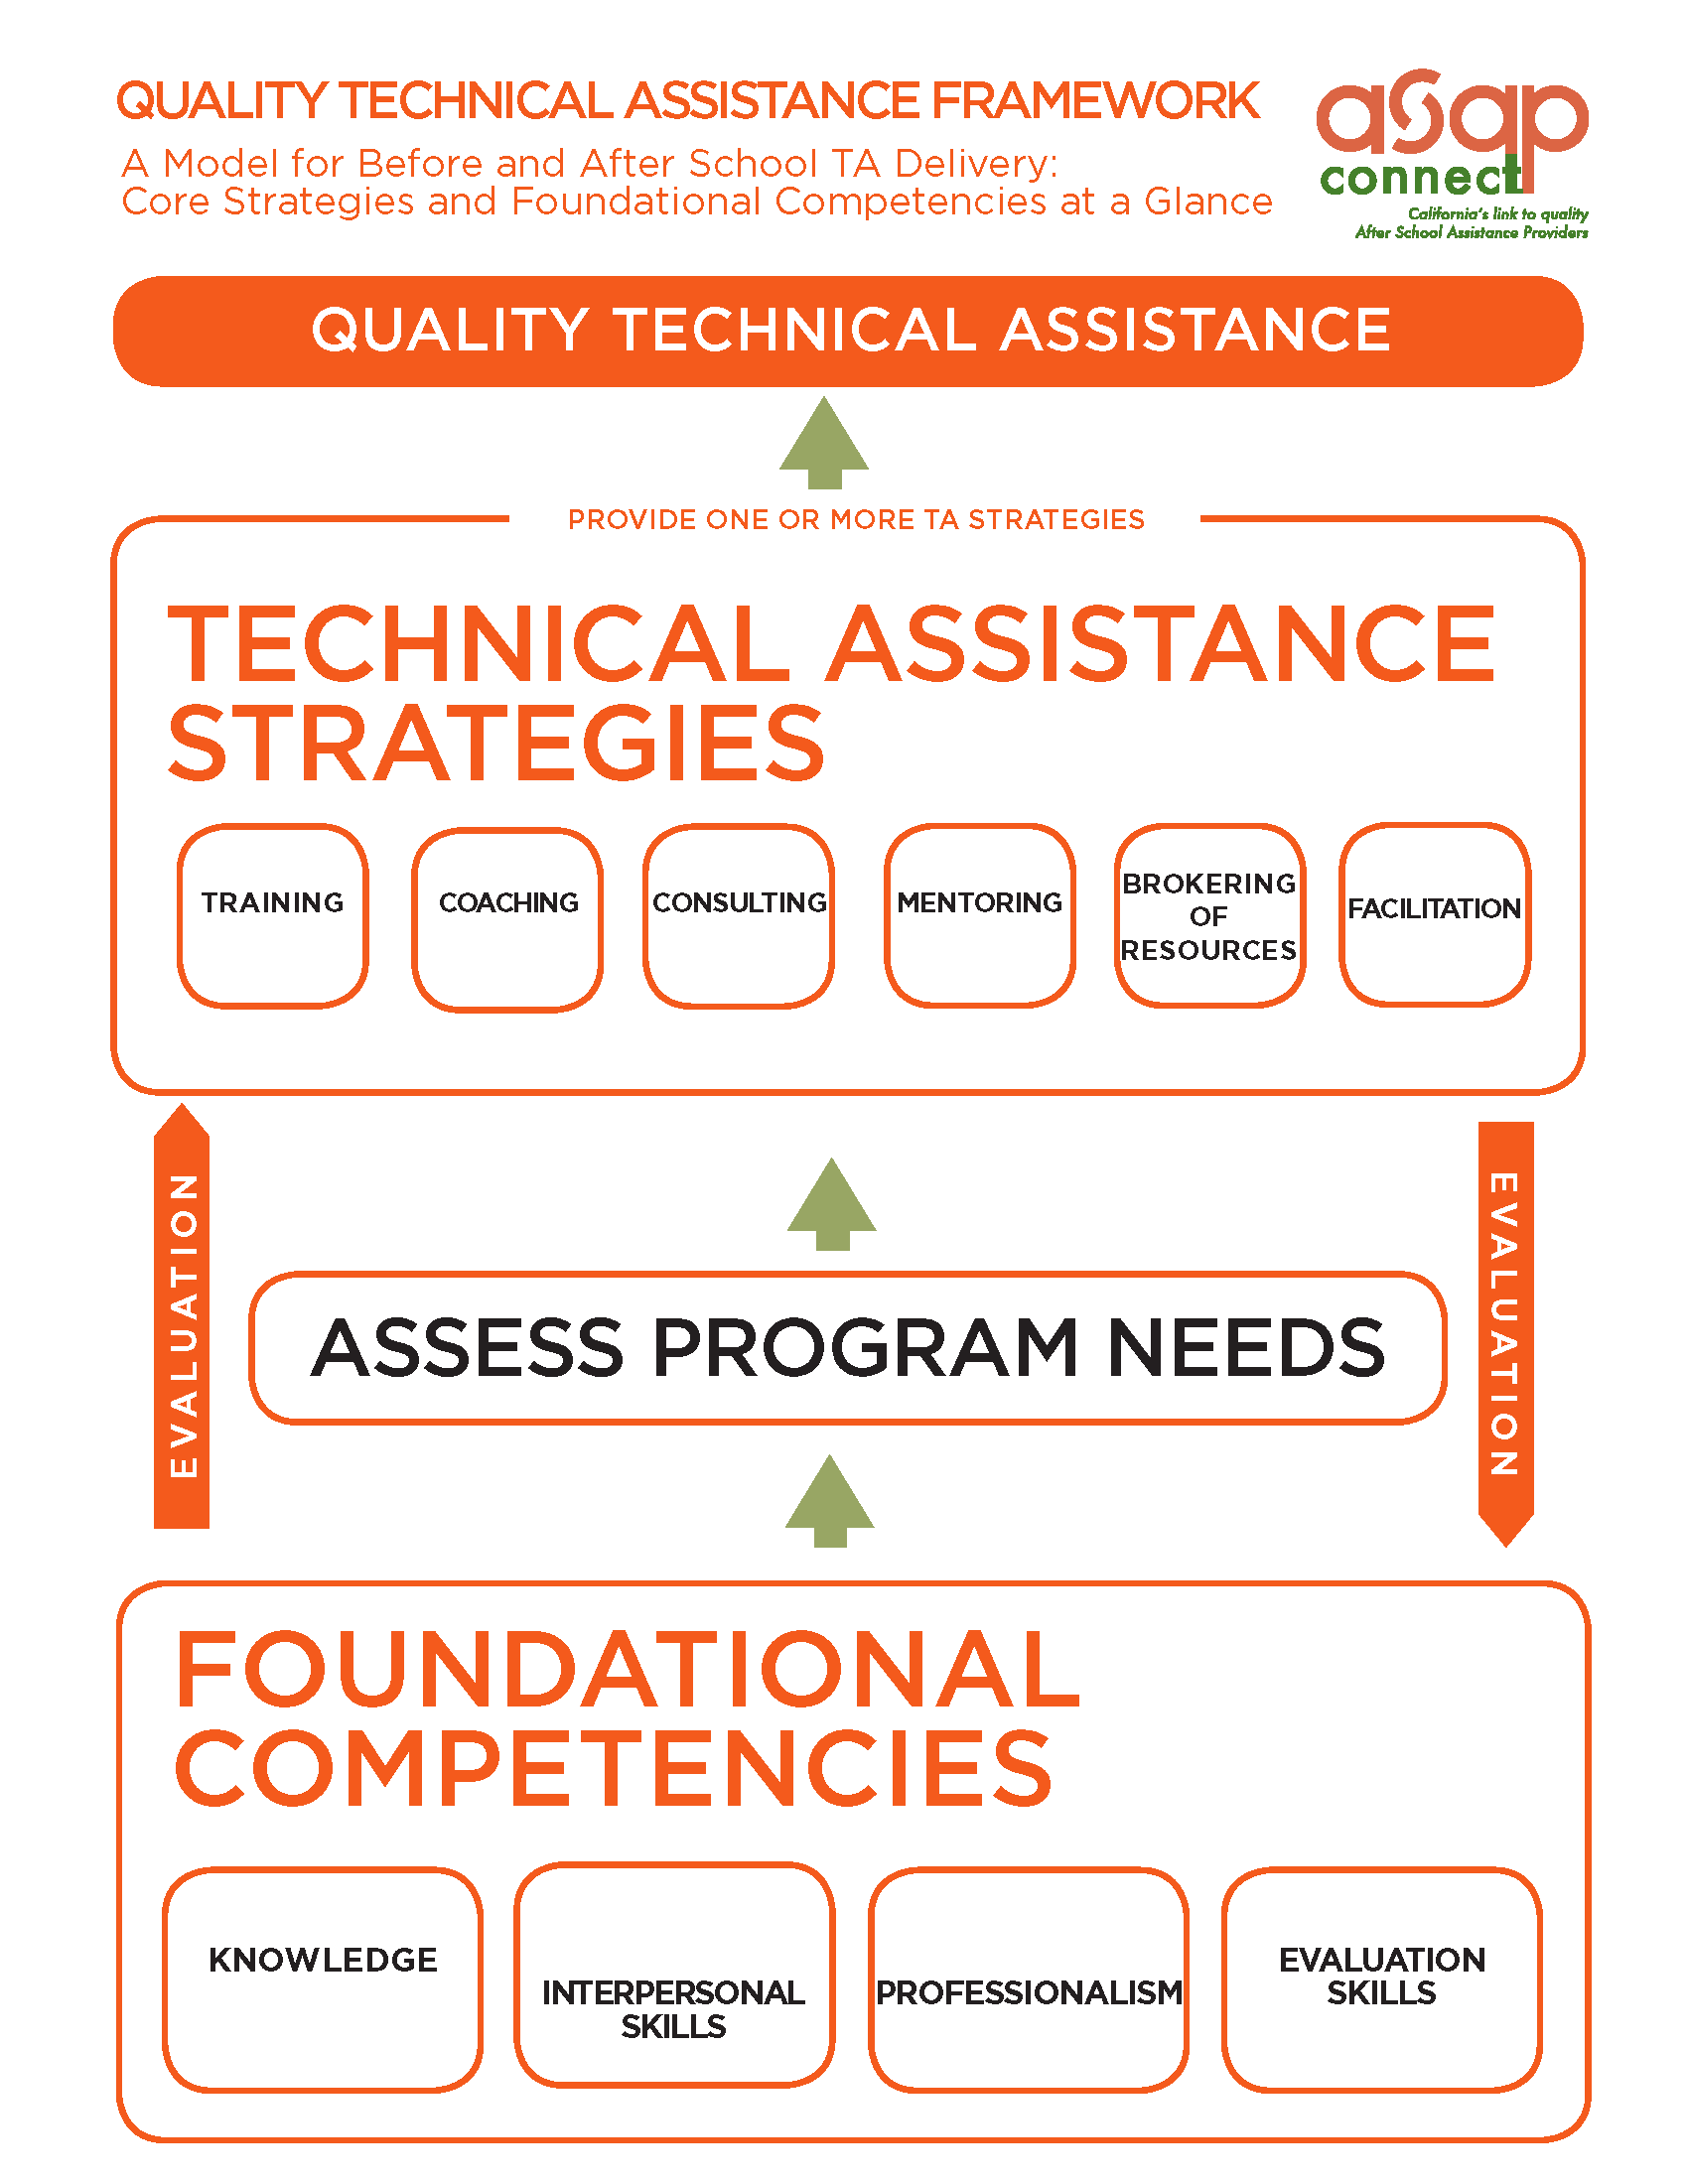 image showing a matrix of technical assistance strategies for expanded learning programs